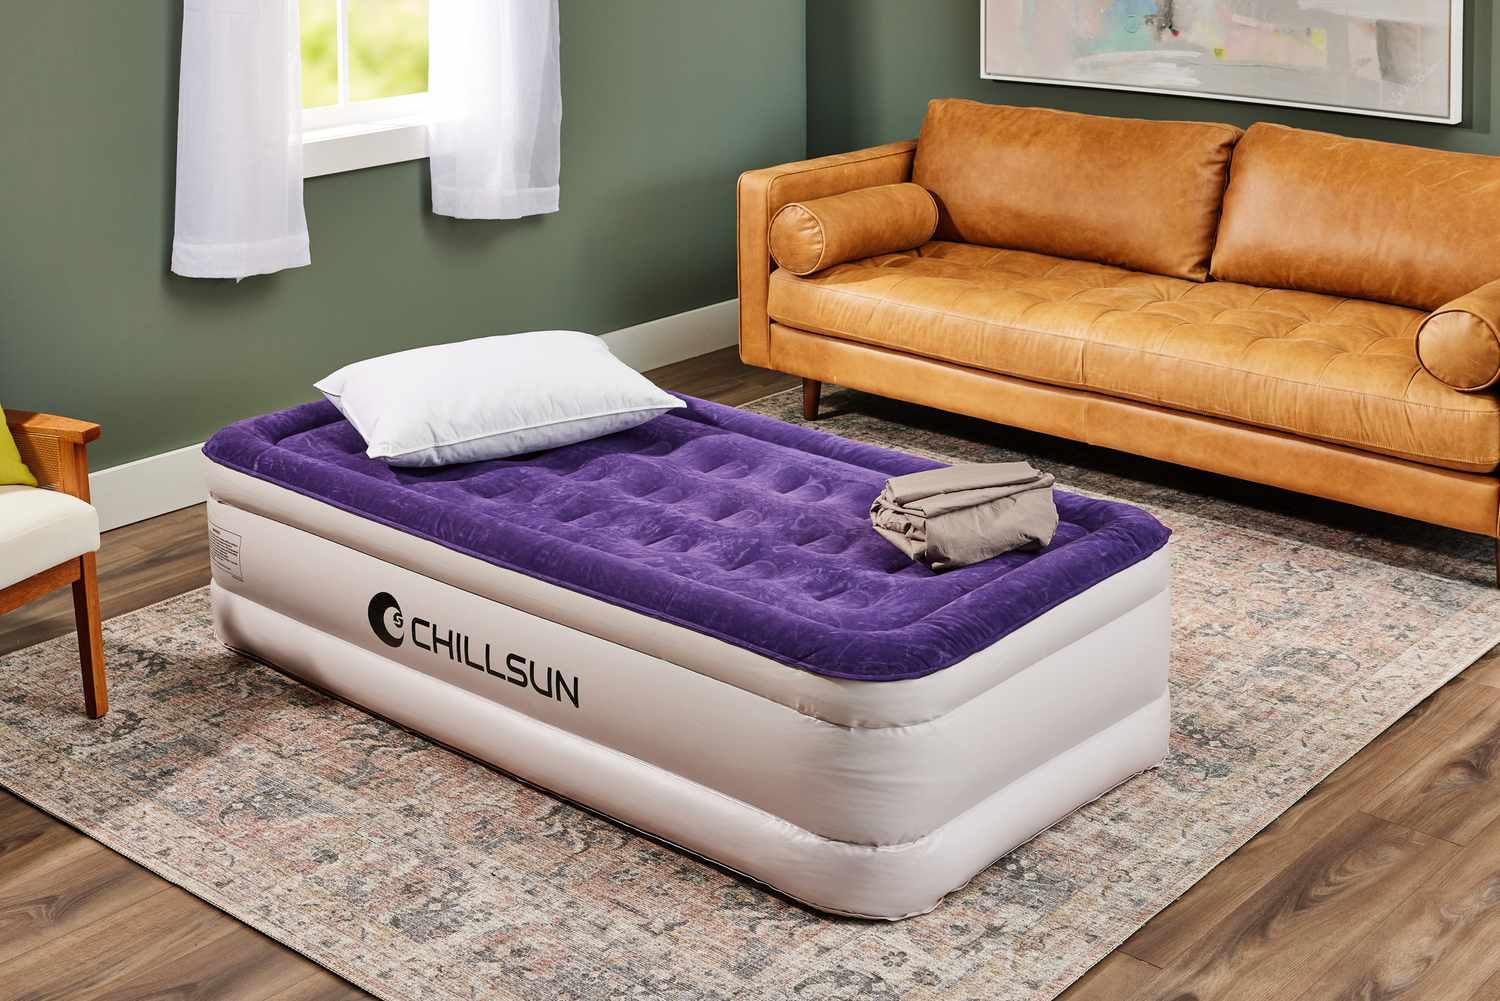 The Chillsun Twin Air Mattress fully inflated and set on a rug